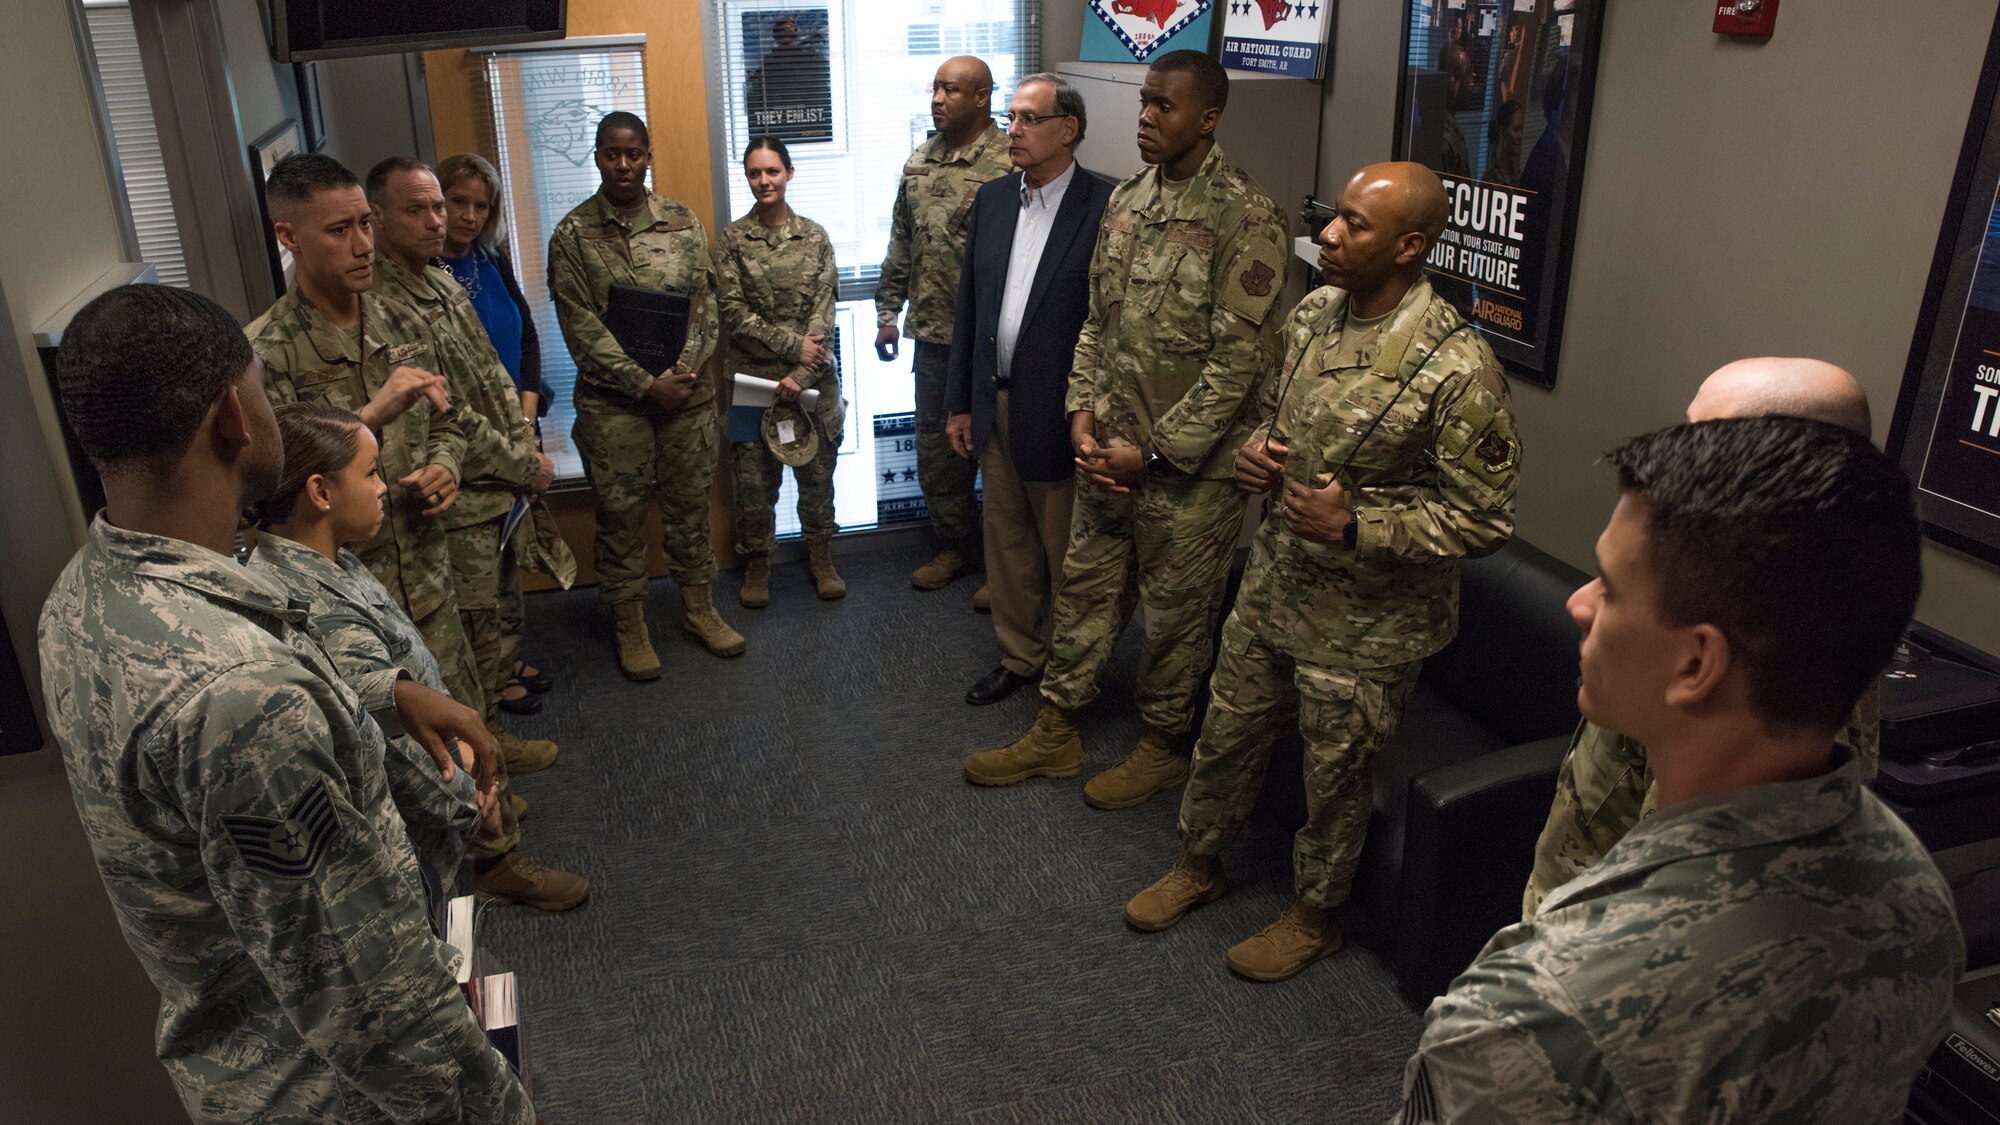 Chief Master Sergeant of the Air Force Kaleth O. Wright meets 188th Wing recruiters at Fort Smith, Ark., Oct. 5, 2019. During the visit Wright discussed his vision for Air Force recruitment and some ideas on how to better identify the Air Force and recruiter needs. (U.S. Air National Guard photo by Tech. Sgt. Daniel J. Condit)